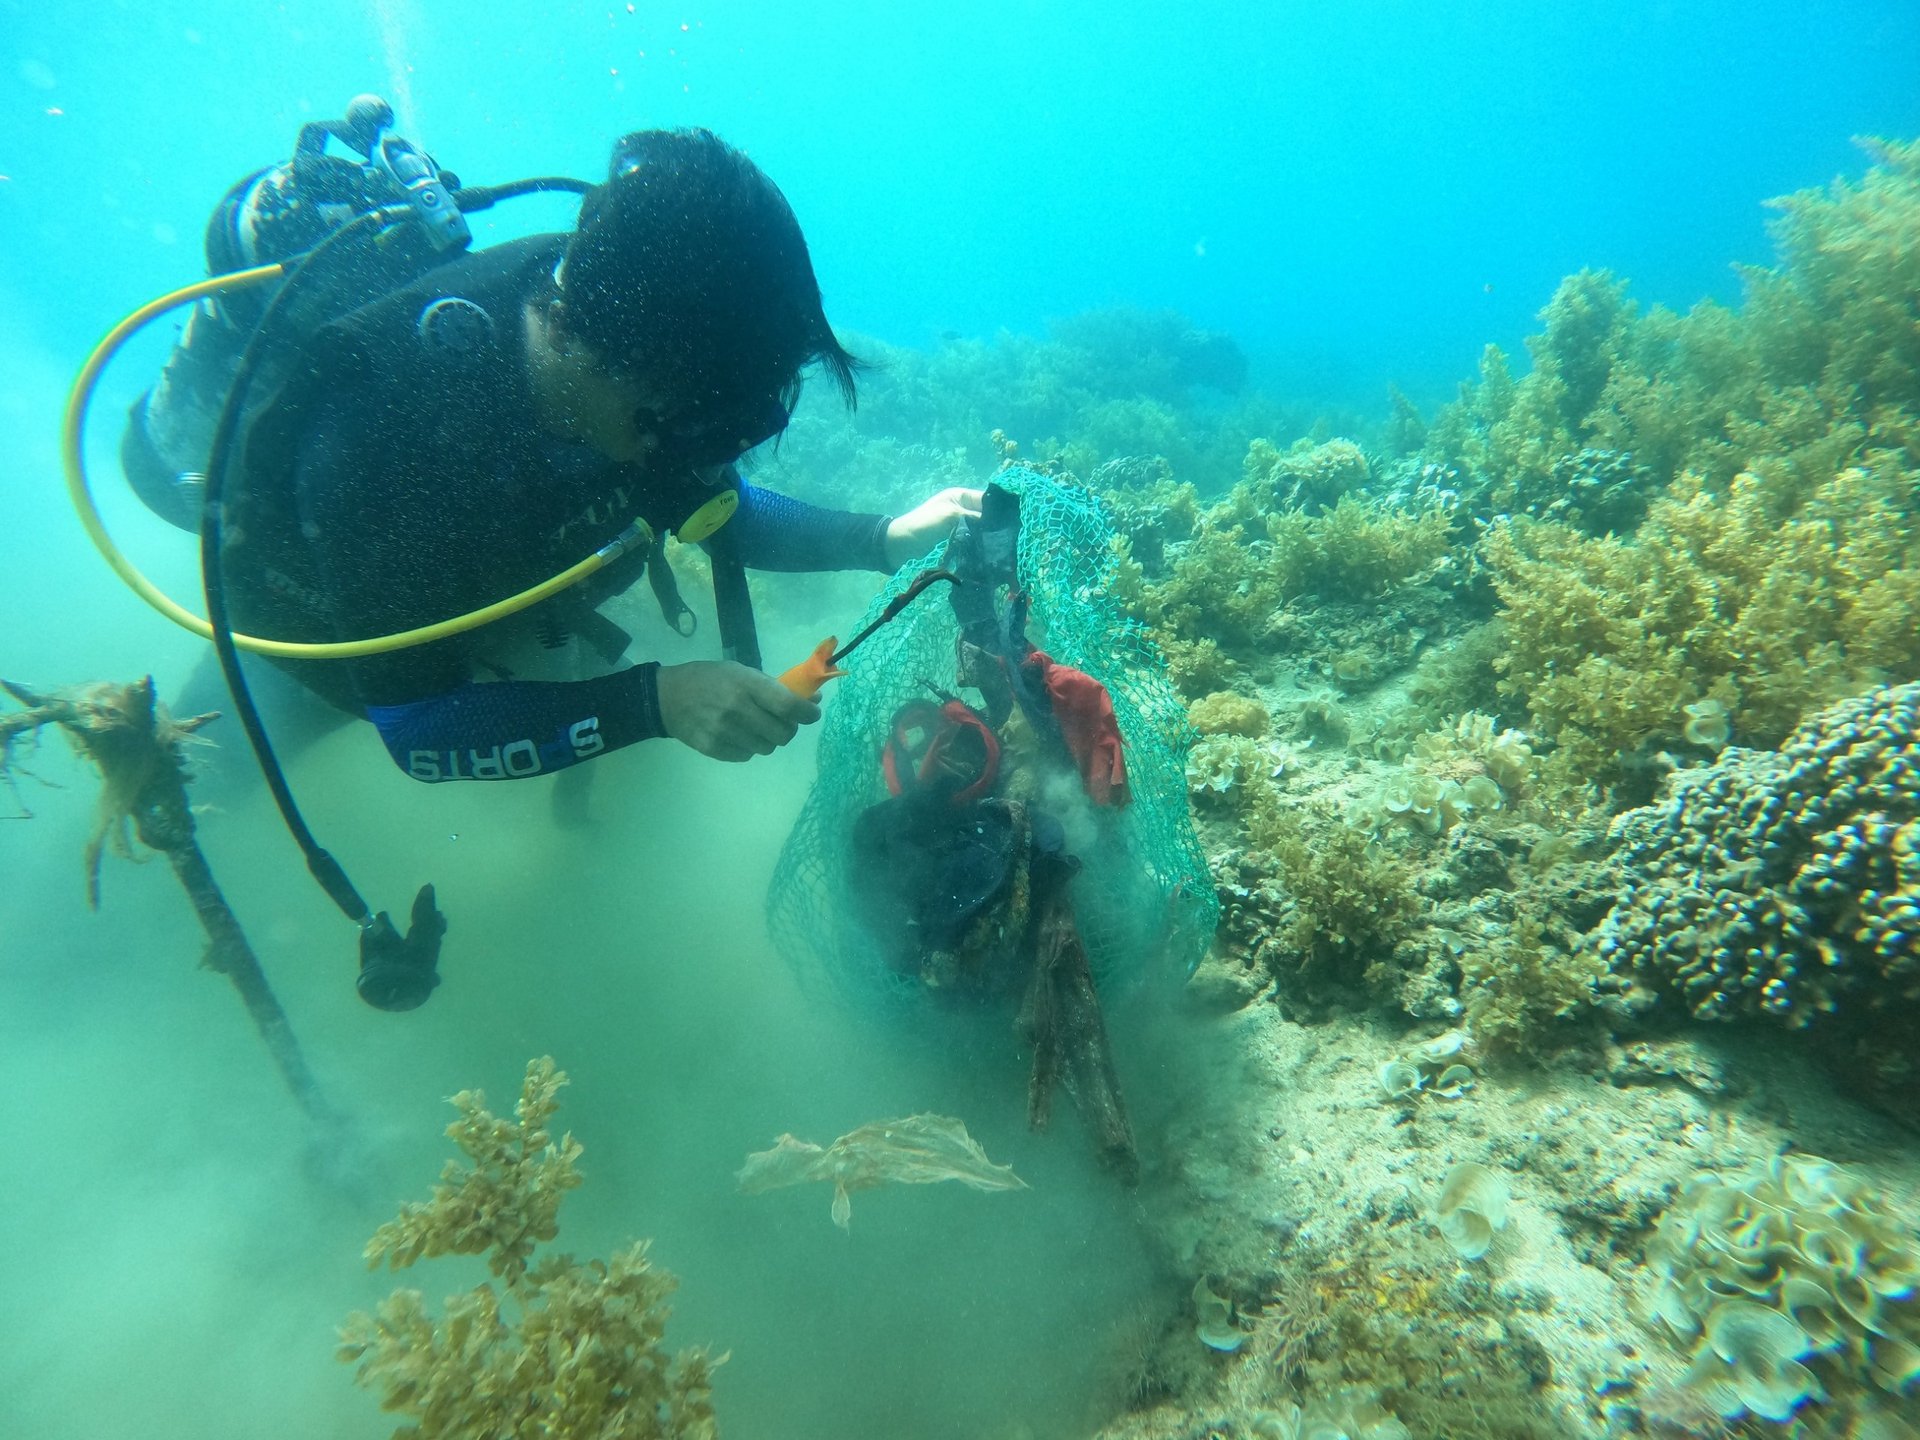 Divers collecting debris from the seabed while protecting the coral. Photo: Vu Dinh Thung.